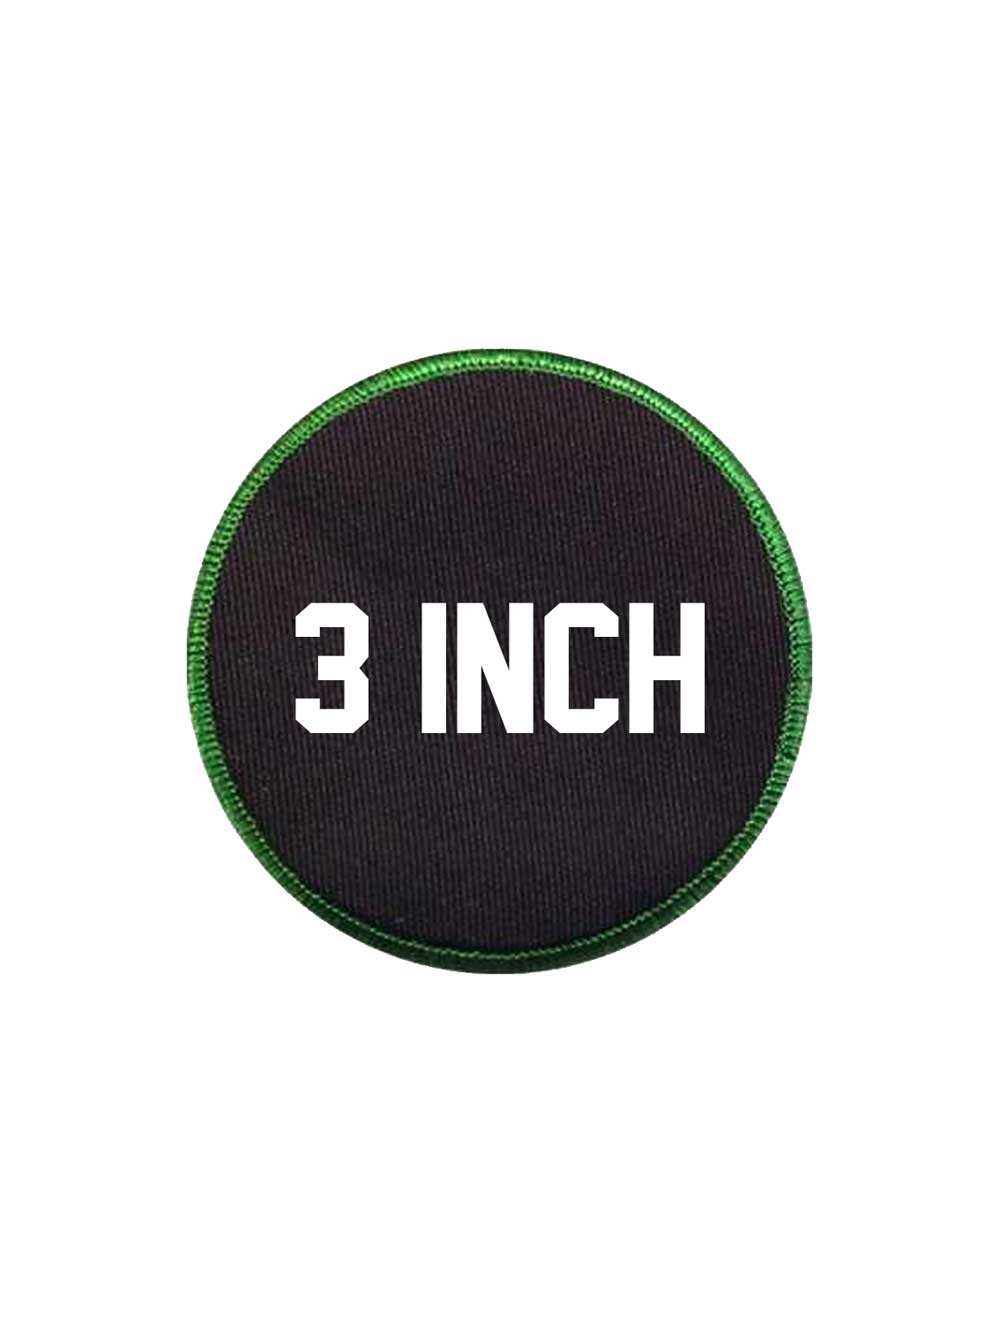 Embroidered Patches - 3 Inch